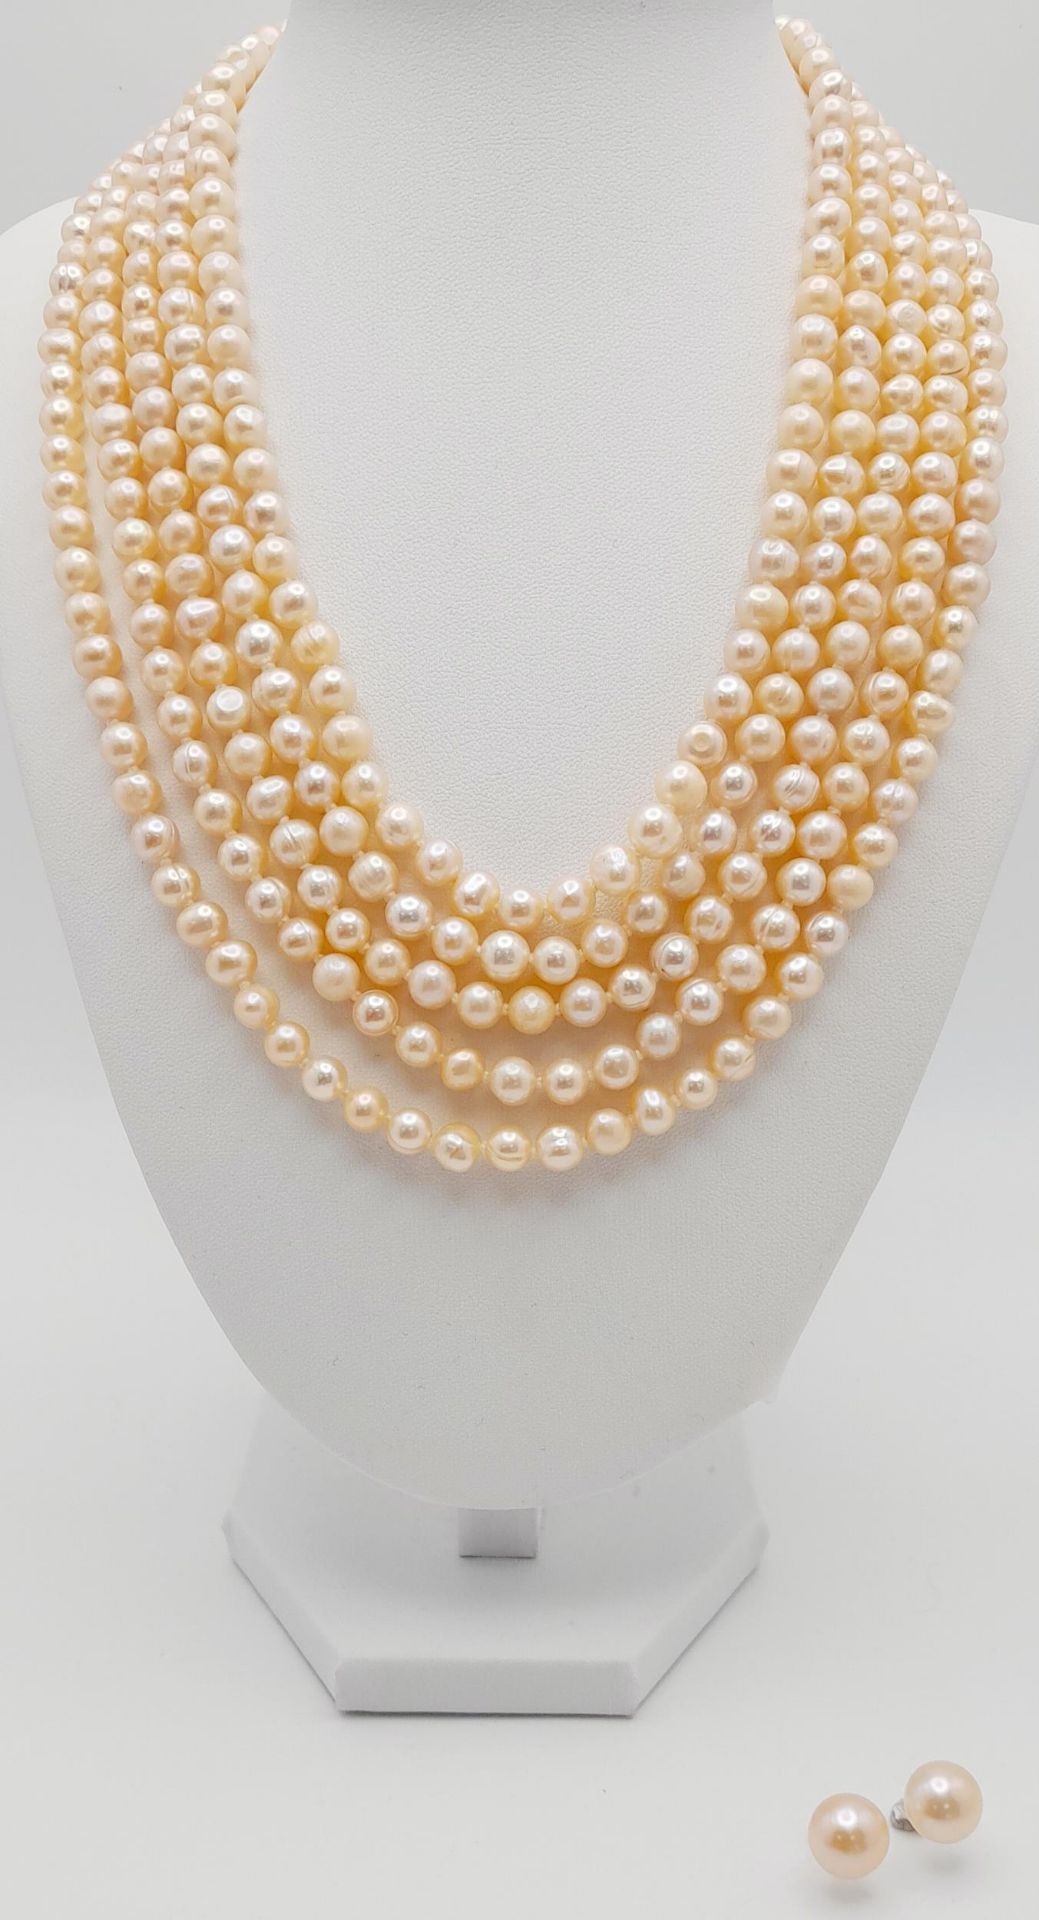 A statement five row pink, cultured pearl necklace accompanied by a pair of pink pearl stud